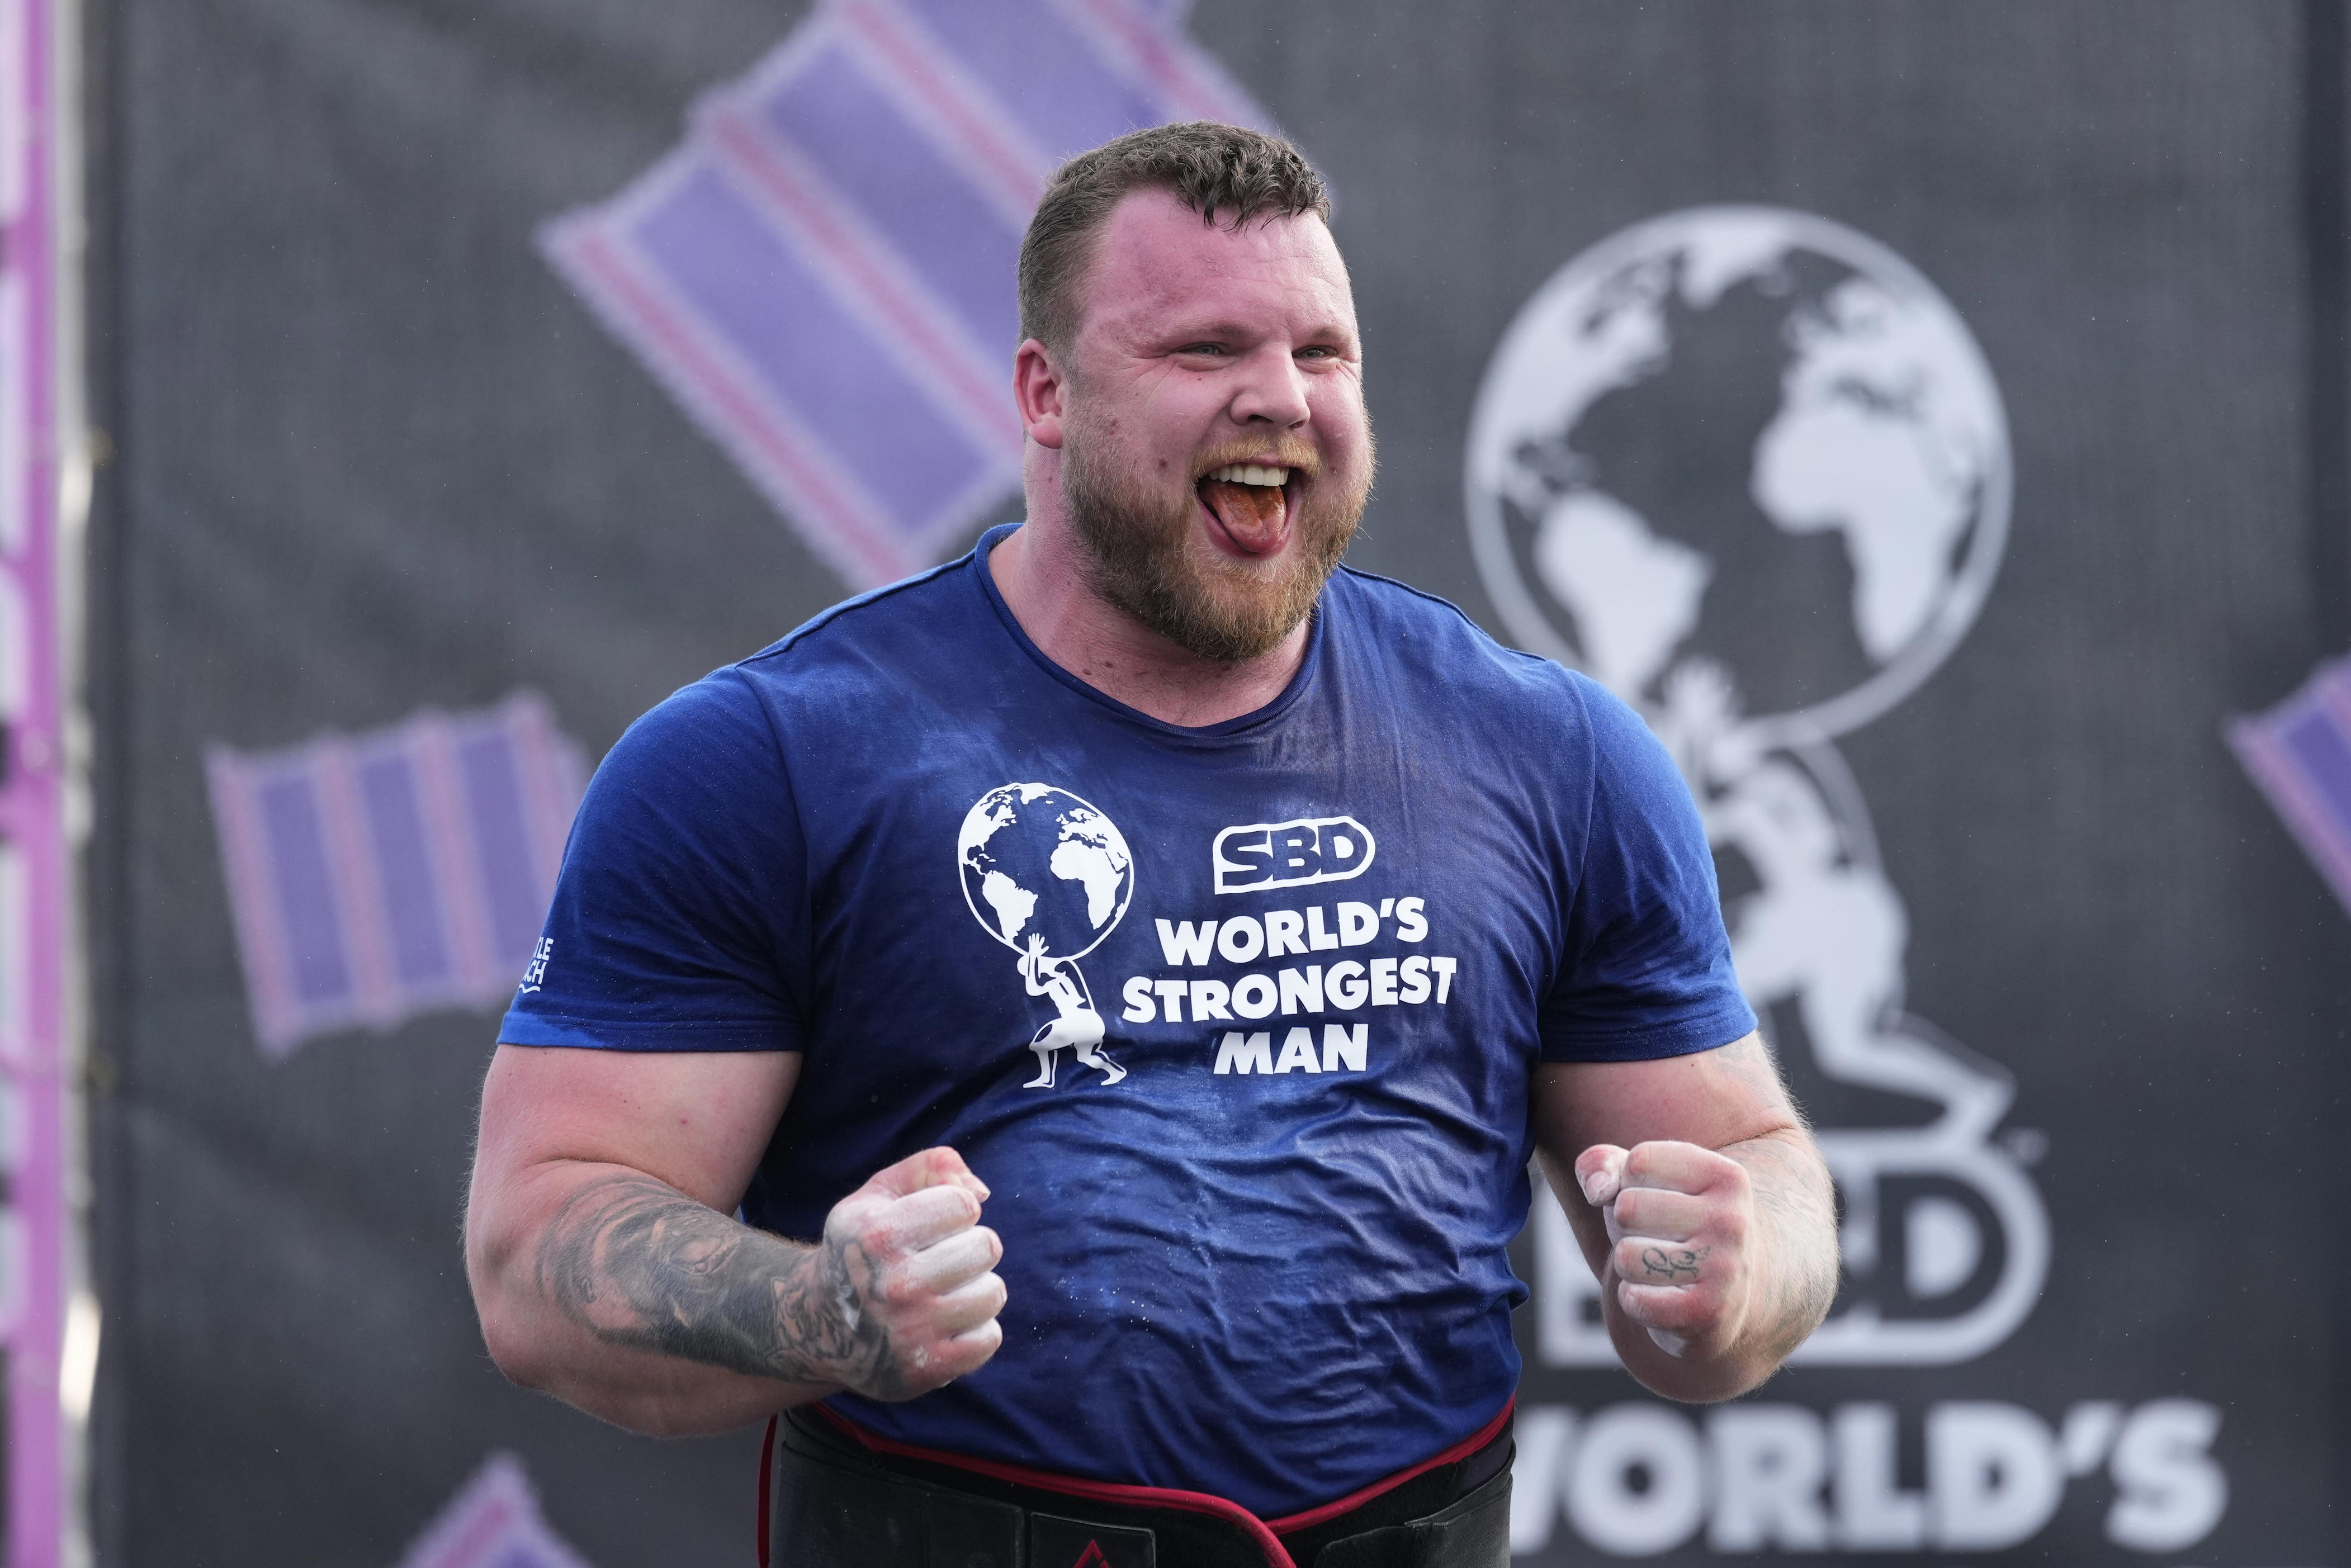 tom stoltman wins world's strongest man competition for third time in four years